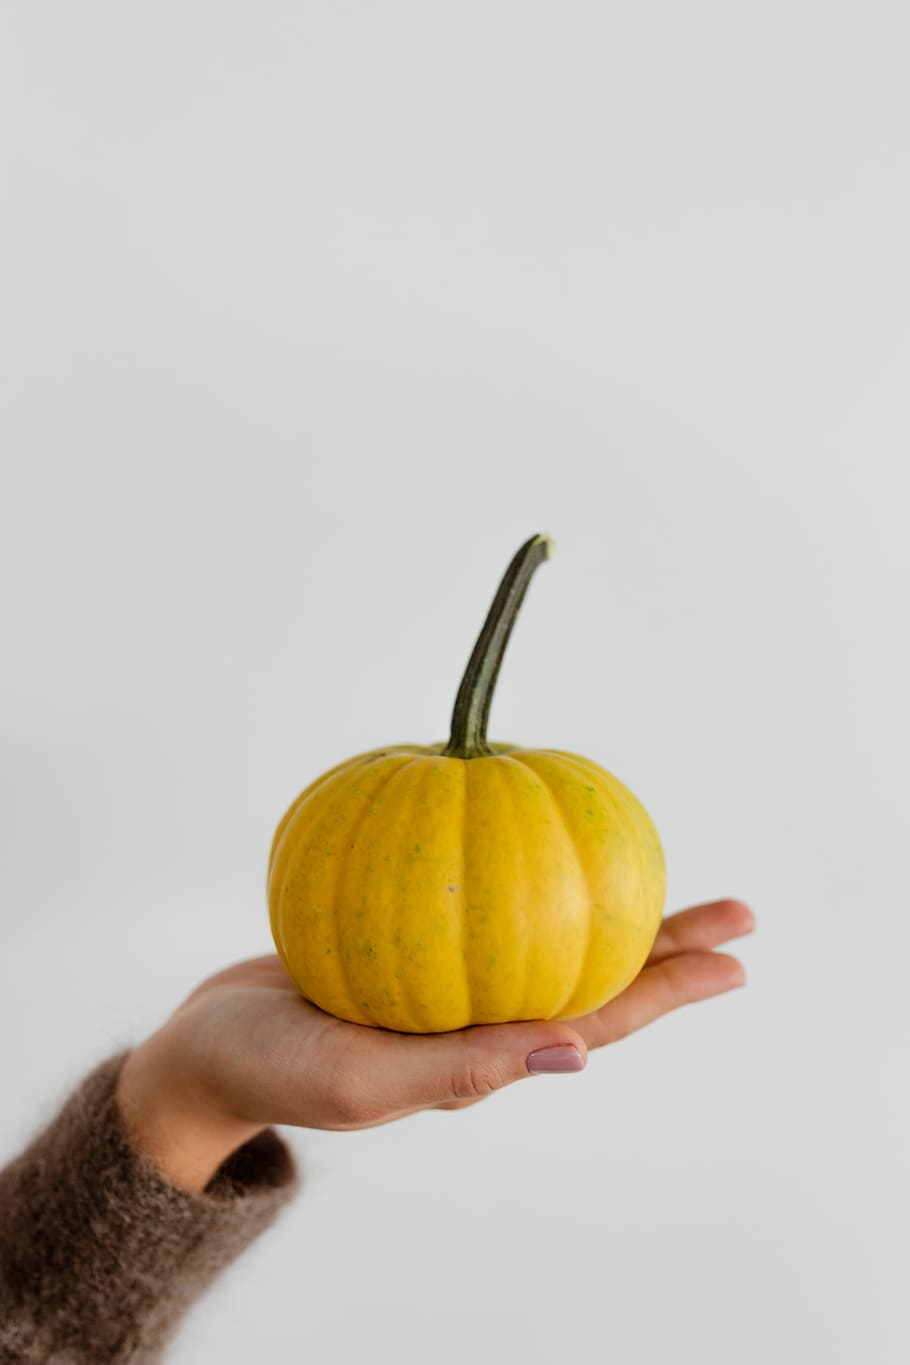 Women's hands in sweater are holding pumpkin, female, person, HD wallpaper